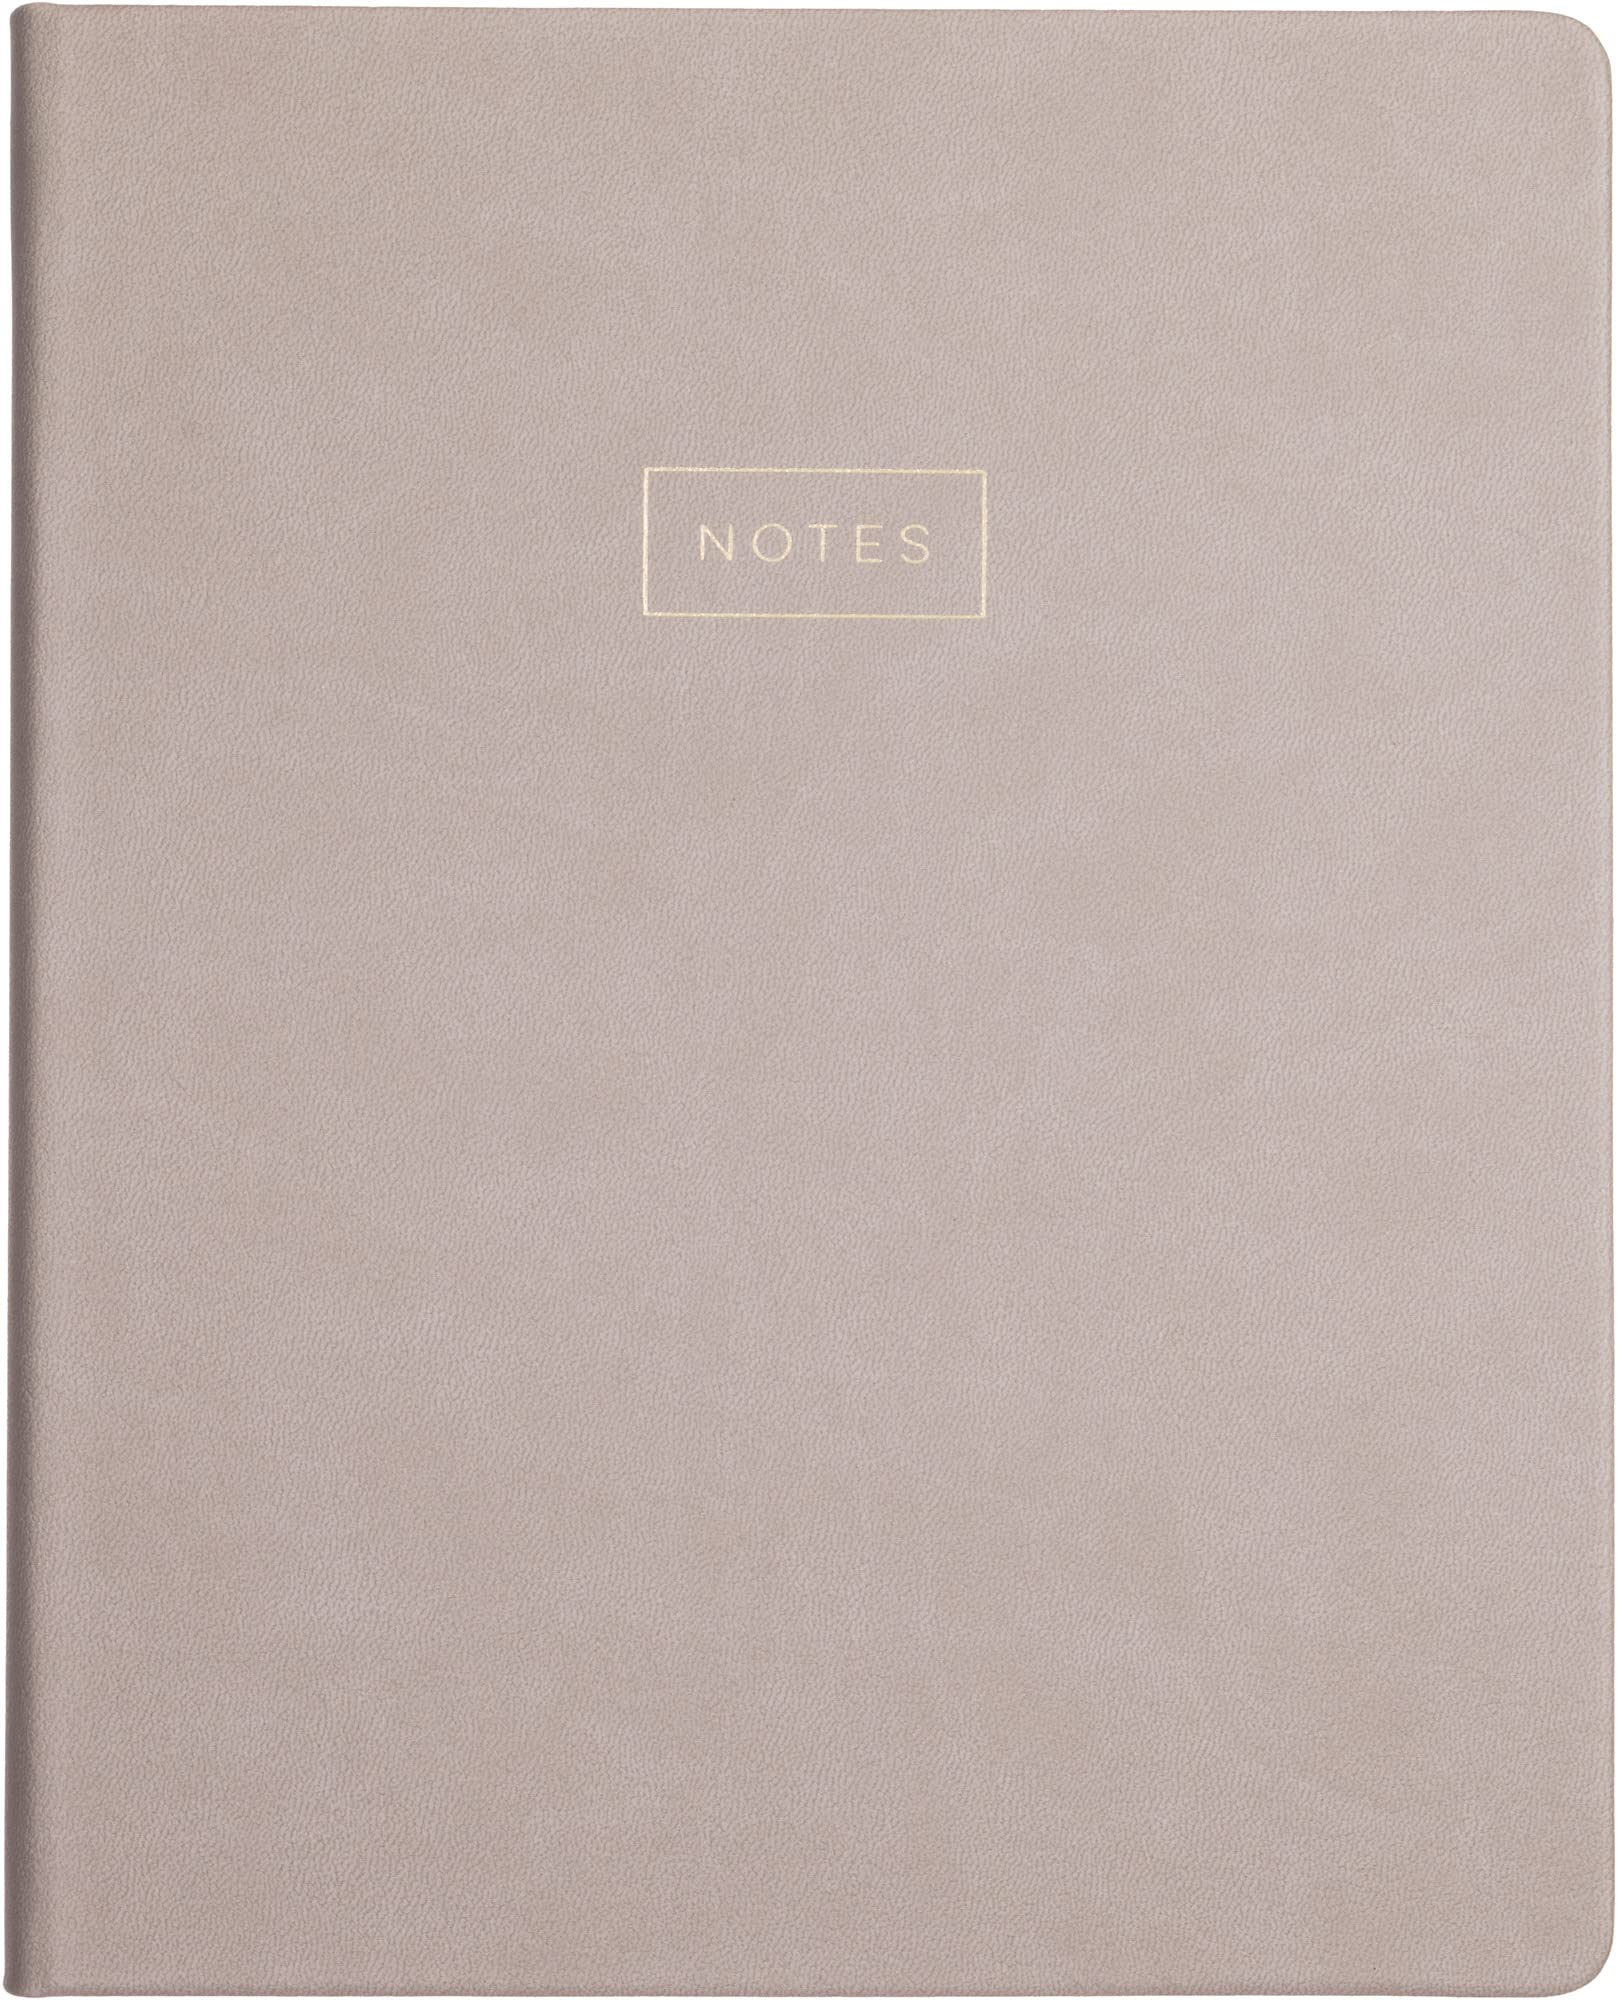 Eccolo Large Lined Journal Notebook Grey